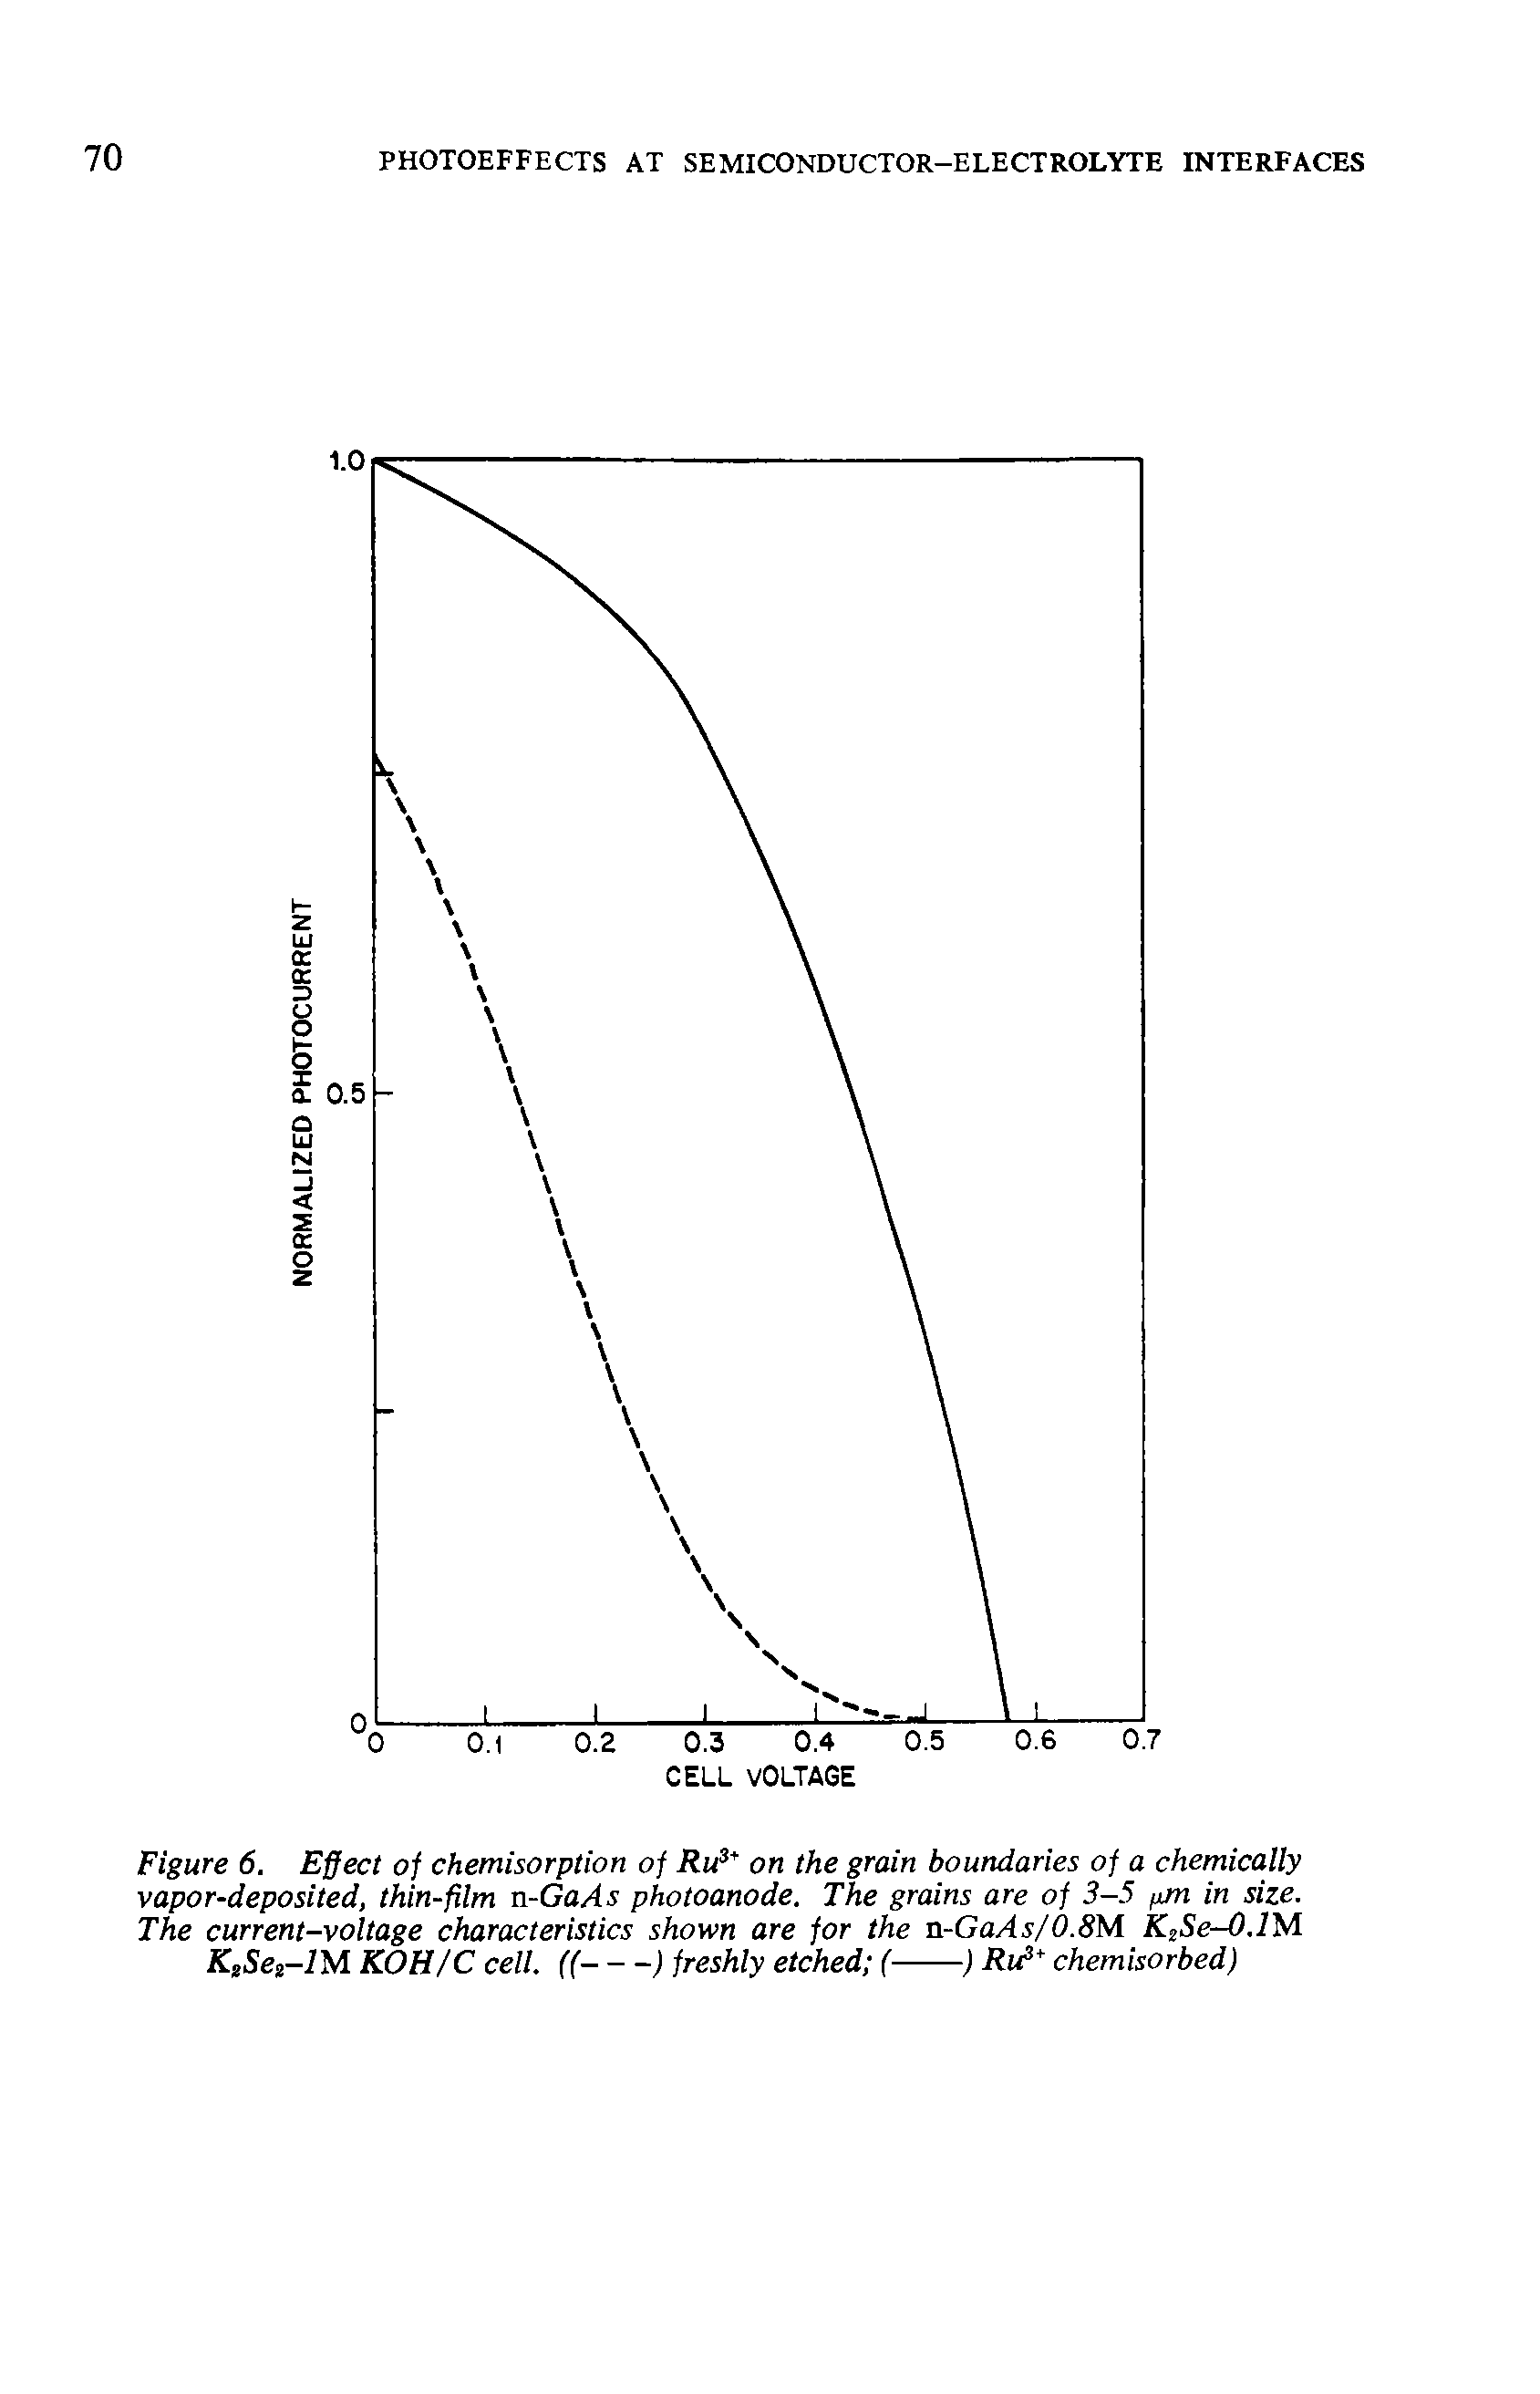 Figure 6. Effect of chemisorption of Ru3 on the grain boundaries of a chemically vapor-deposited, thin-film n-GaAs photoanode. The grains are of 3-5 pm in size. The current-voltage characteristics shown are for the n-GaAs/0.8M KnSe-0.1 M KsSet-lM KOH/C cell. ((-------------) freshly etched (---) Ru3 chemisorbed)...